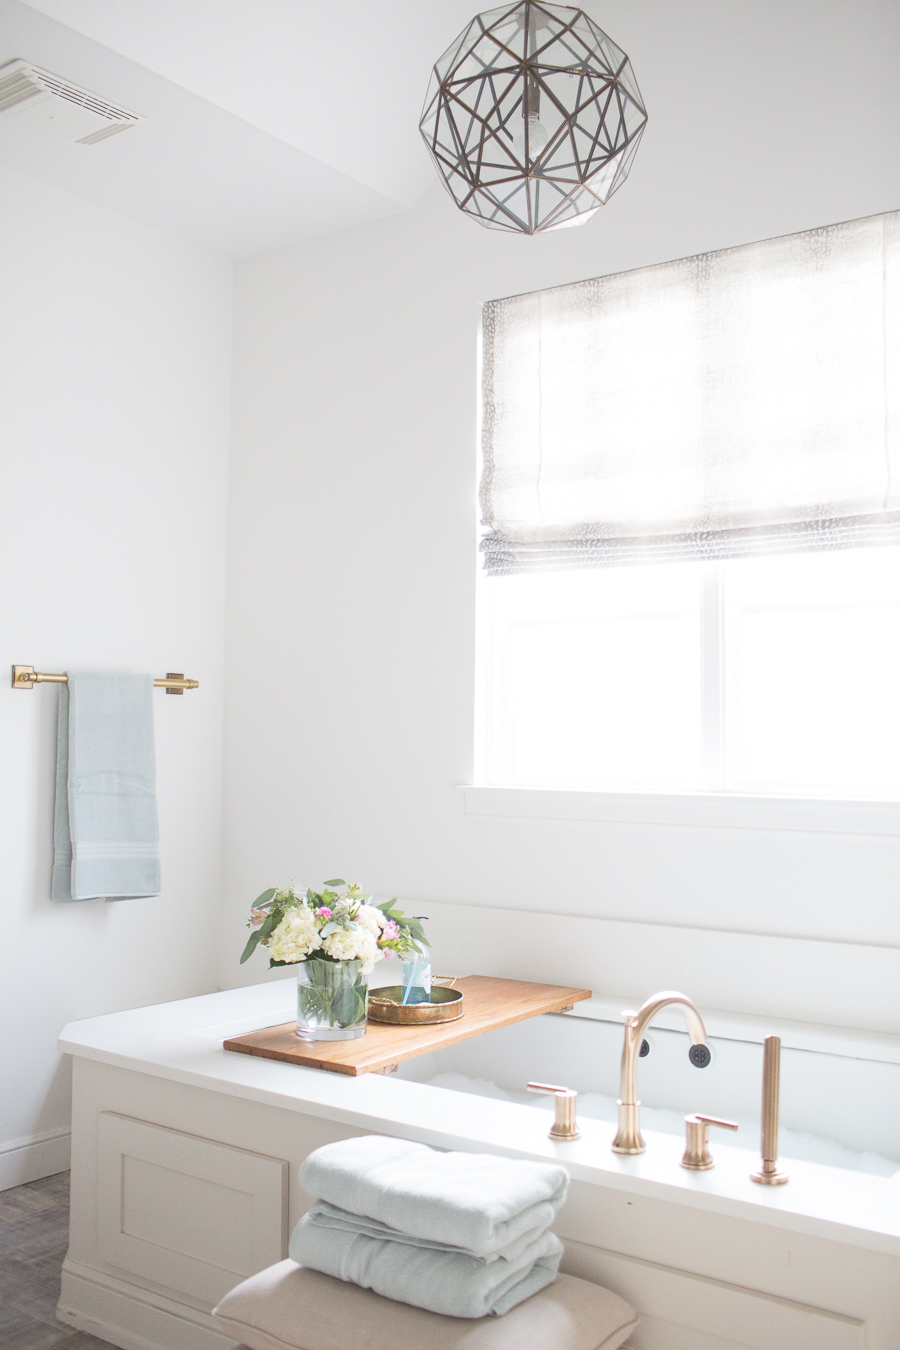 Refresh Your Master Bedroom and Bath with Pottery Barn white bathroom with geometric light fixture, soaker tub, powder blue towels and a wooden tub tray with floral arrangement on top